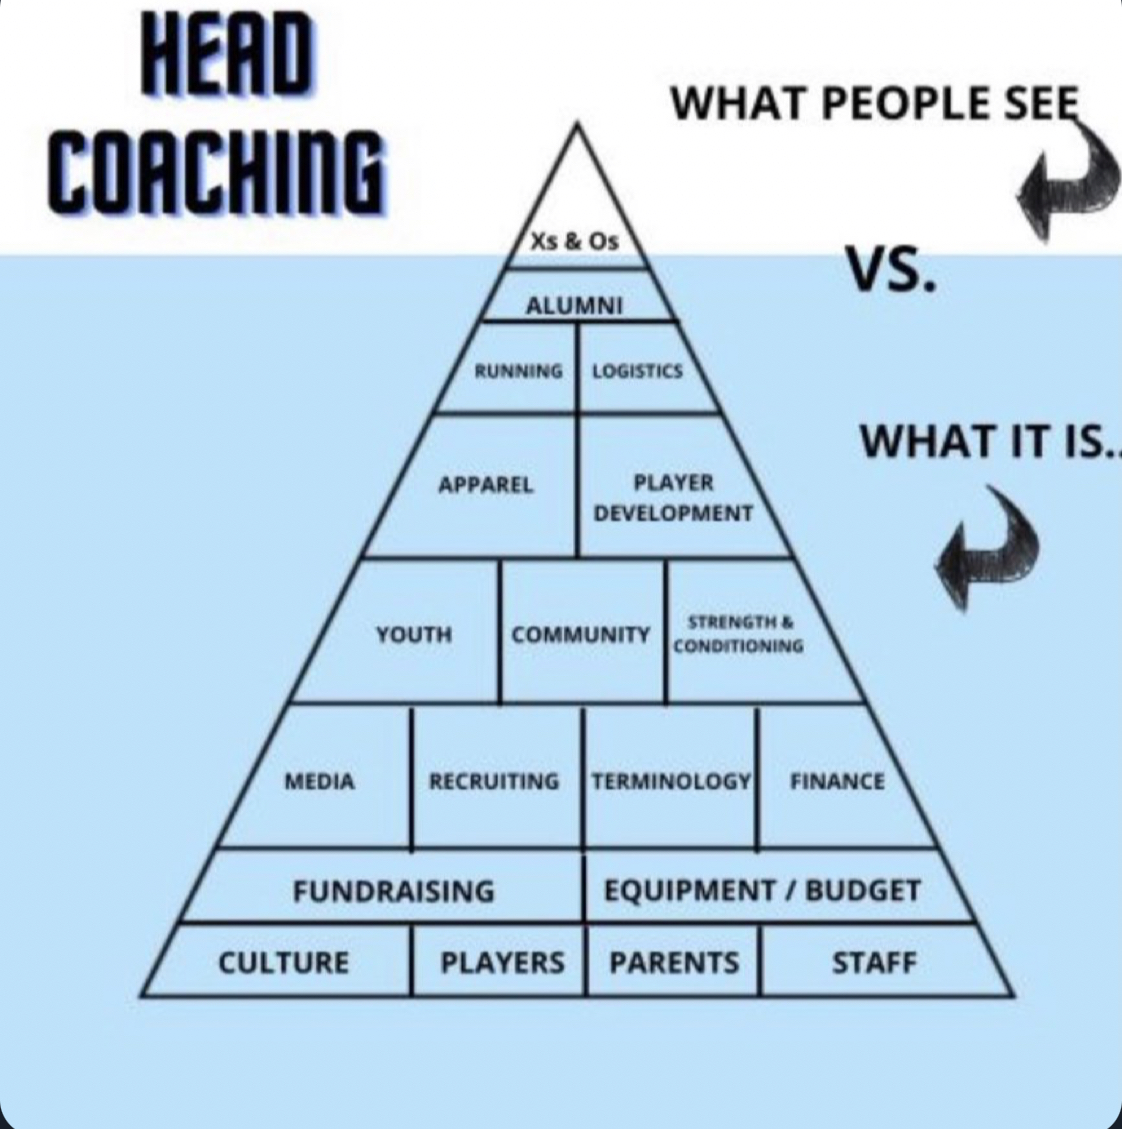 It’s funny how much people don’t know about what goes into coaching a team . Most of the messy part , ain’t even football